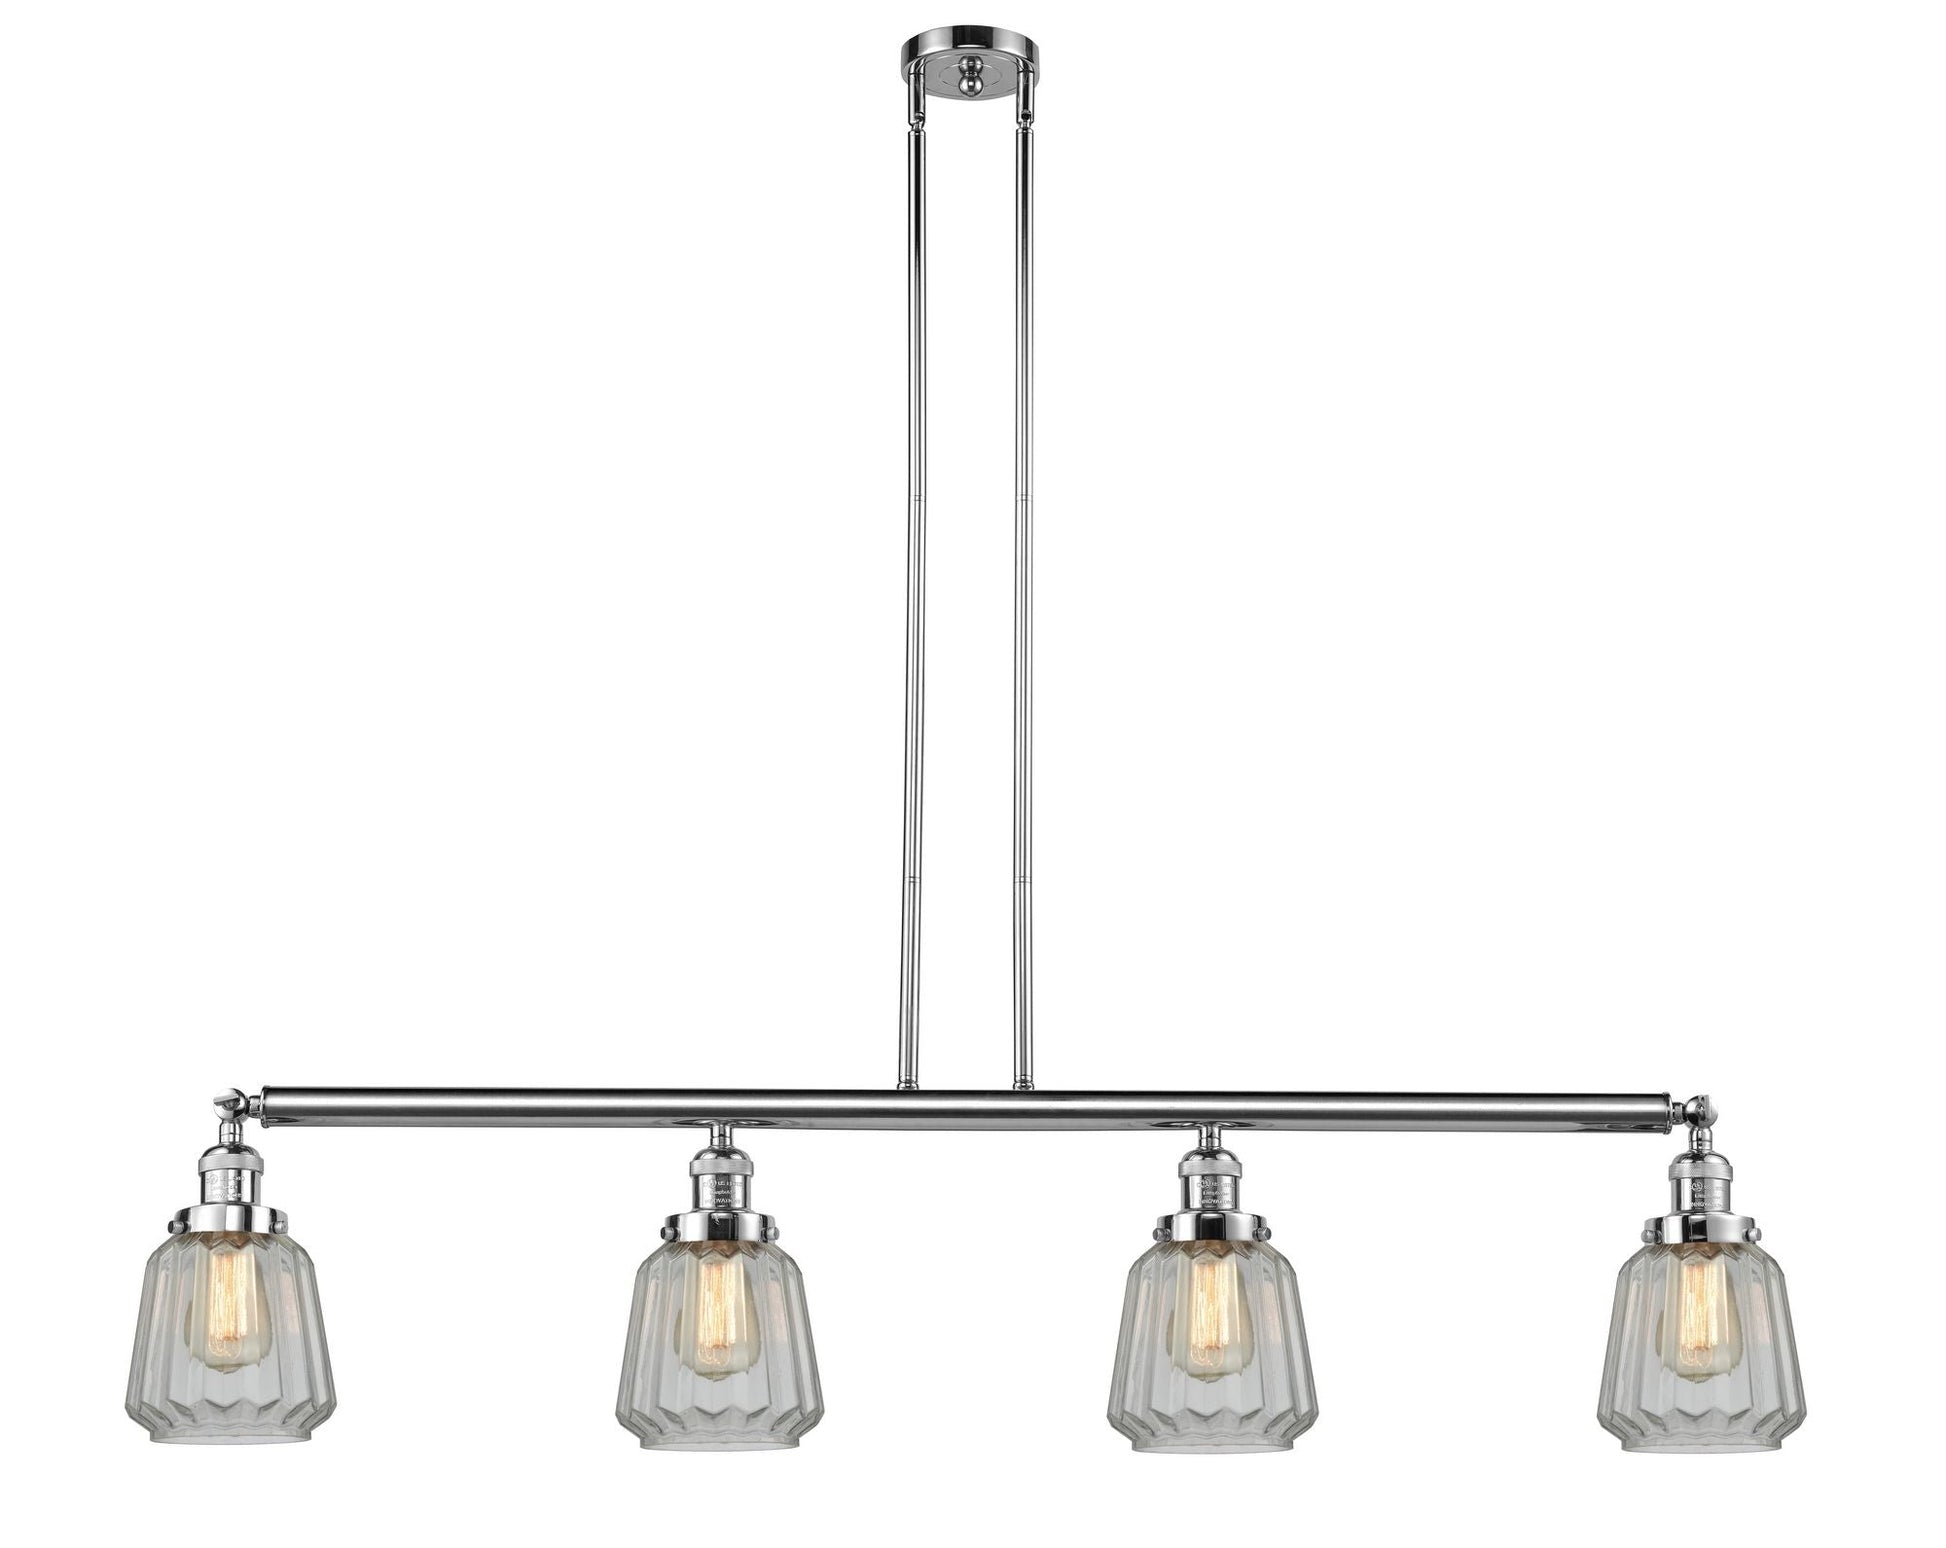 214-PC-G142 4-Light 50.875" Polished Chrome Island Light - Clear Chatham Glass - LED Bulb - Dimmensions: 50.875 x 6.25 x 10<br>Minimum Height : 21<br>Maximum Height : 45 - Sloped Ceiling Compatible: Yes